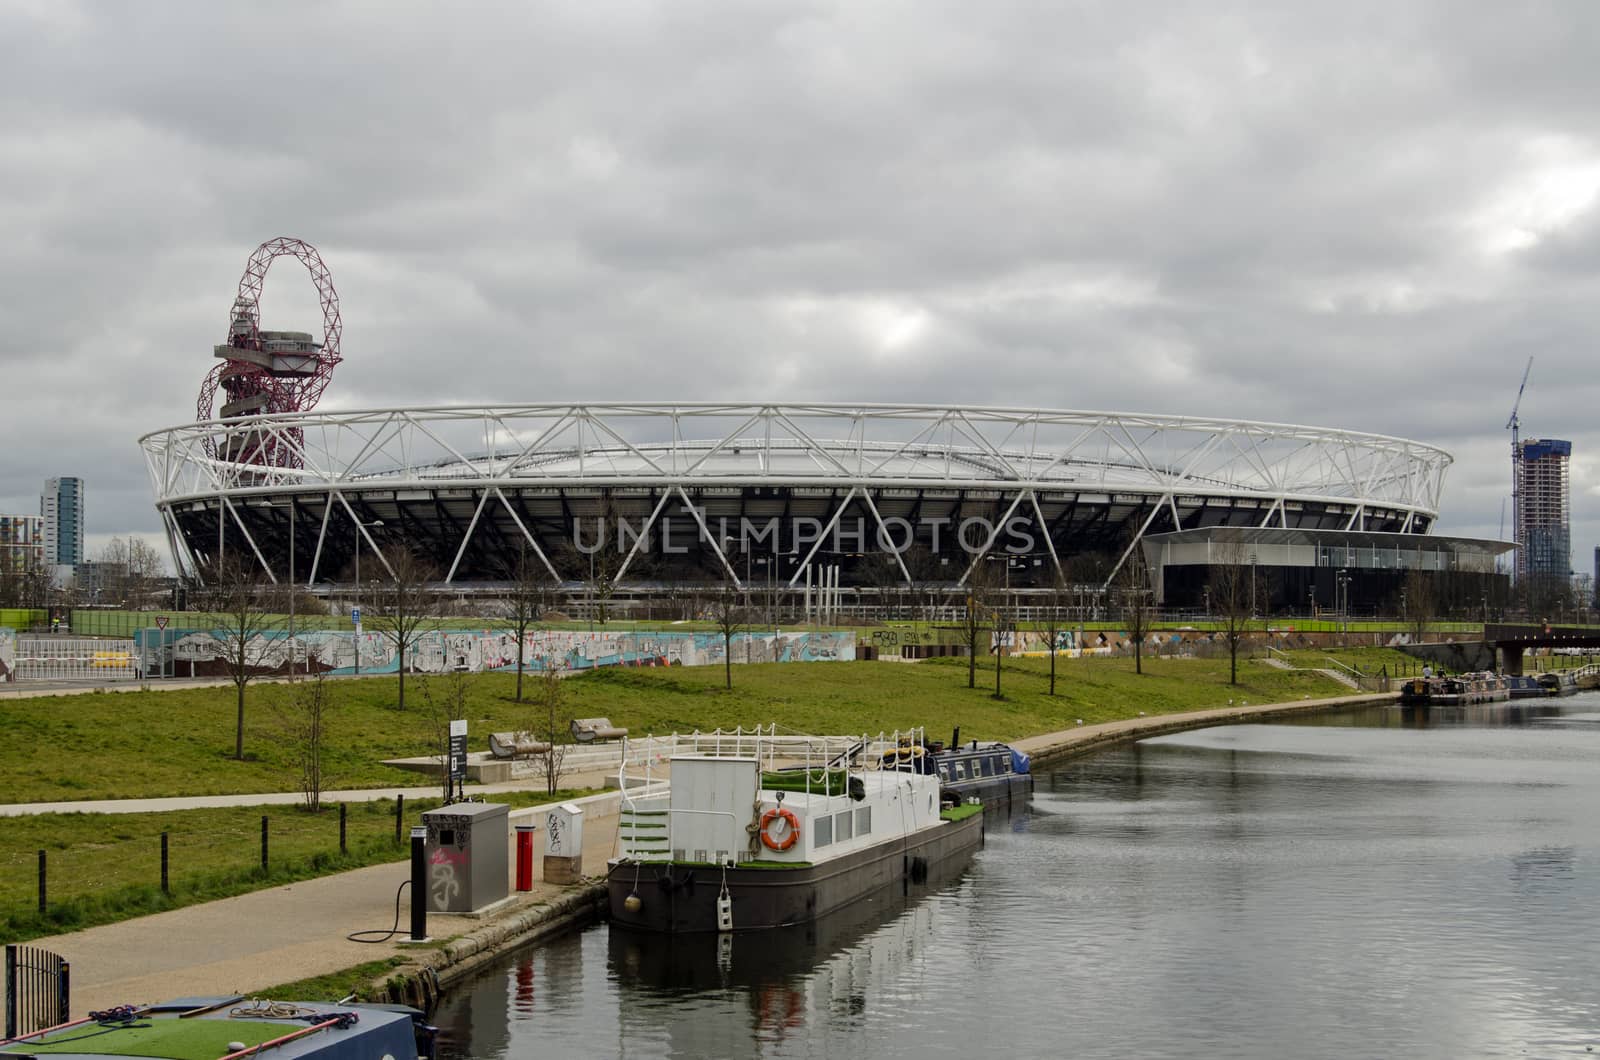 The new West Ham United Stadium in Queen Elizabeth Park, formerly used for the London 2012 Olympics.  With the Orbit tower behind and the Lee Navigation canal on the right.  Cloudy afternoon in March.